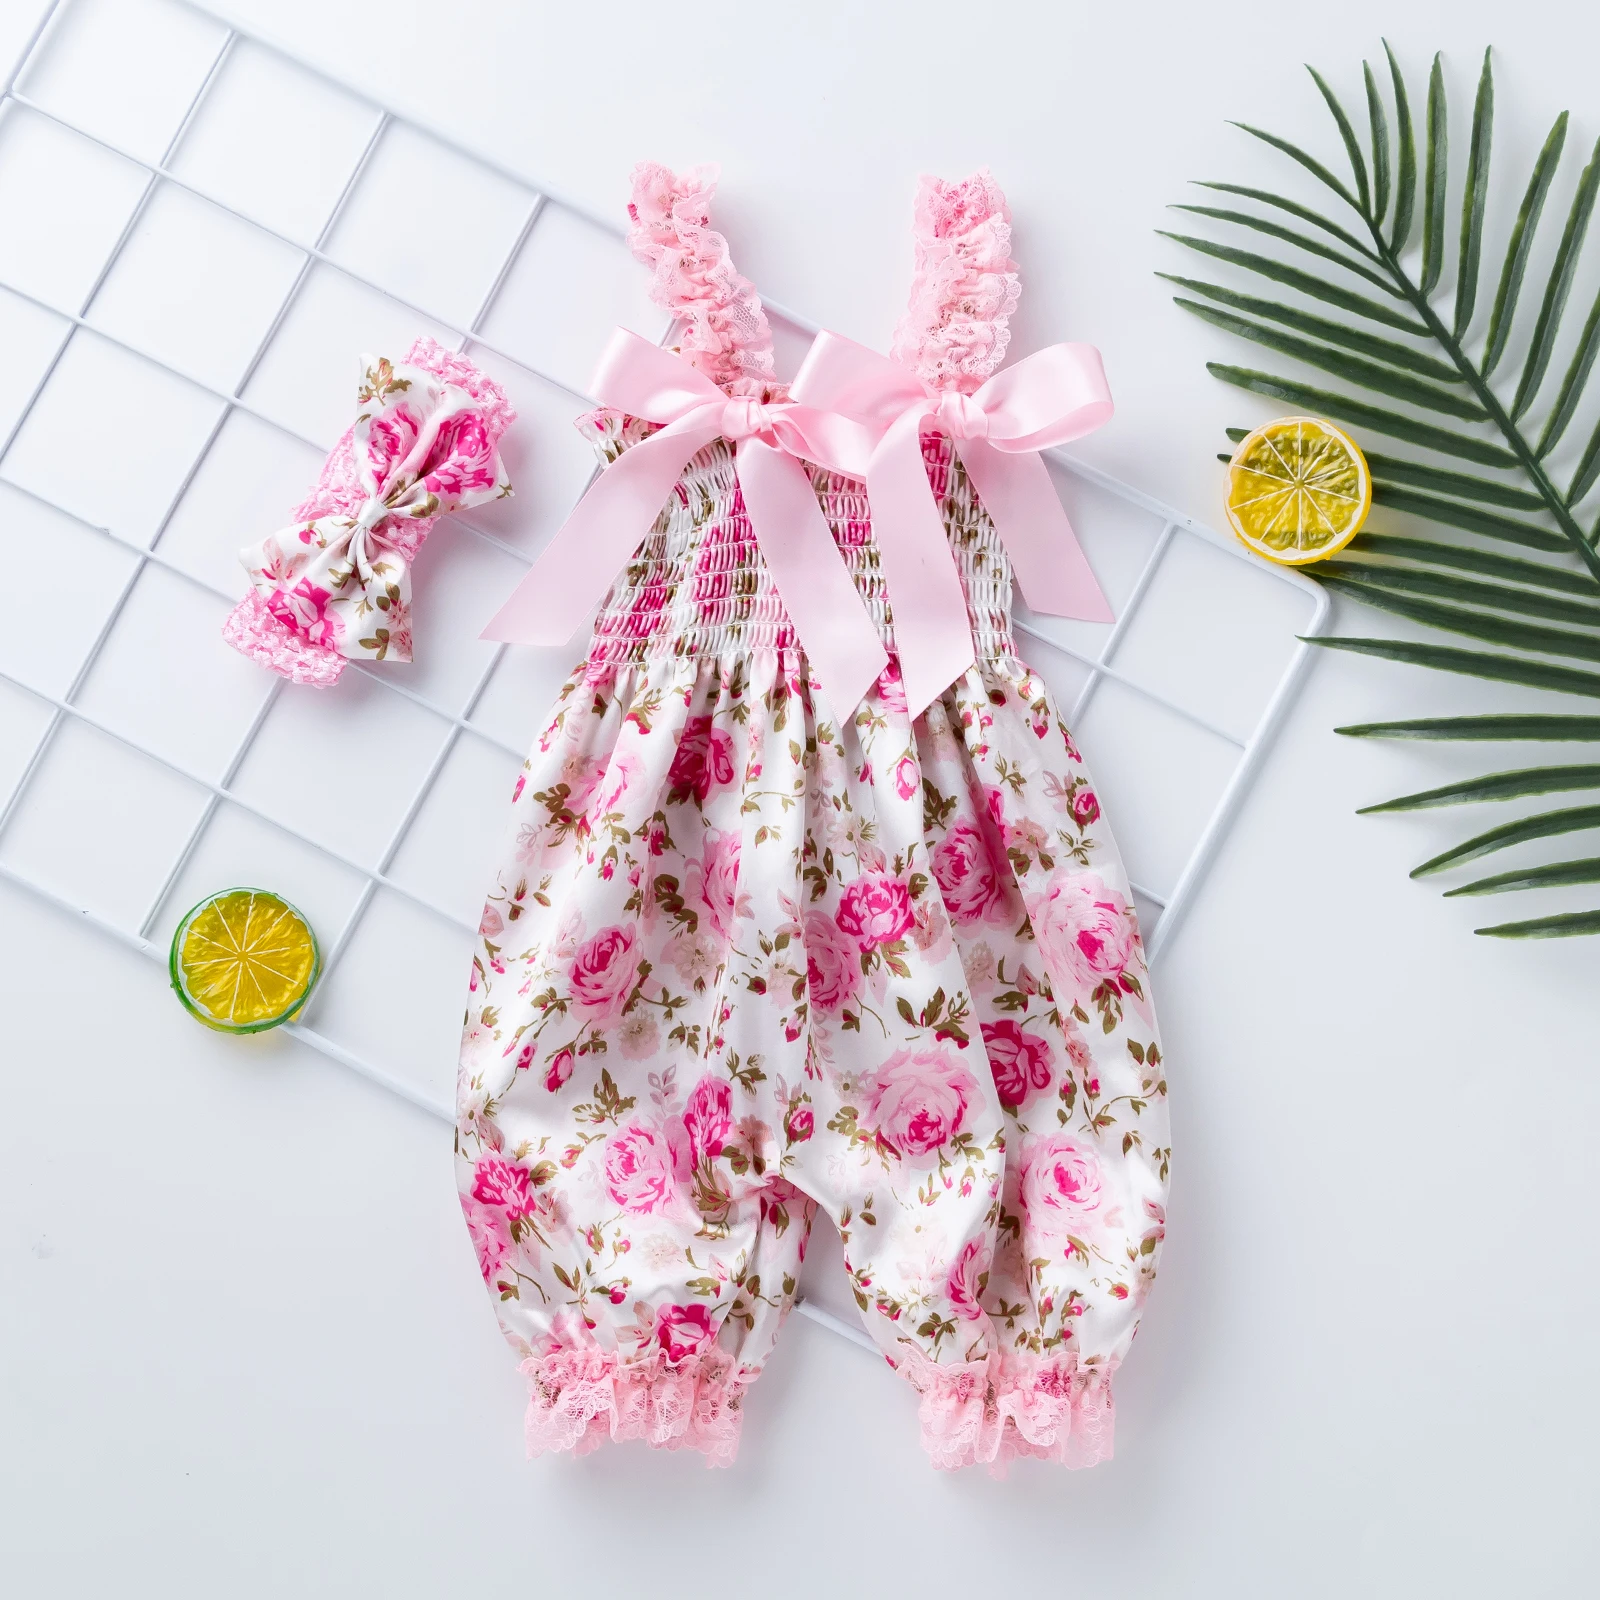 Babany bebe Newborn Baby Lace Bloomer Polyester Romper Girls Clothes Summer Backless Jumpsuit Photography Costume Newborn Knitting Romper Hooded  Baby Rompers